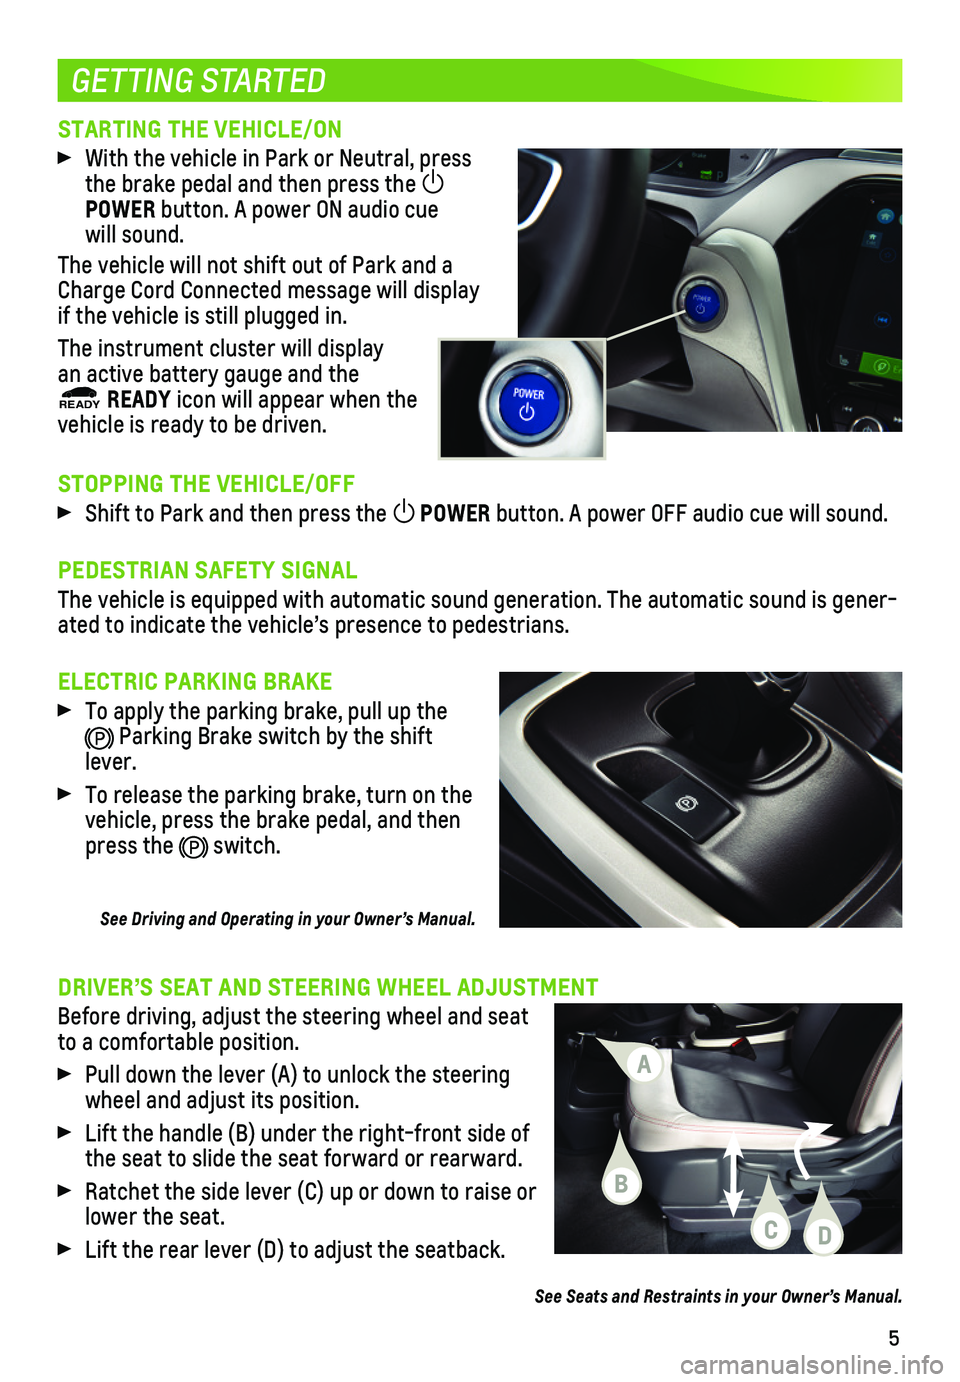 CHEVROLET BOLT EV 2020  Get To Know Guide 5
STARTING THE VEHICLE/ON
 With the vehicle in Park or Neutral, press the brake pedal and then press the POWER button. A power ON audio cue will sound.
The vehicle will not shift out of Park and a Ch